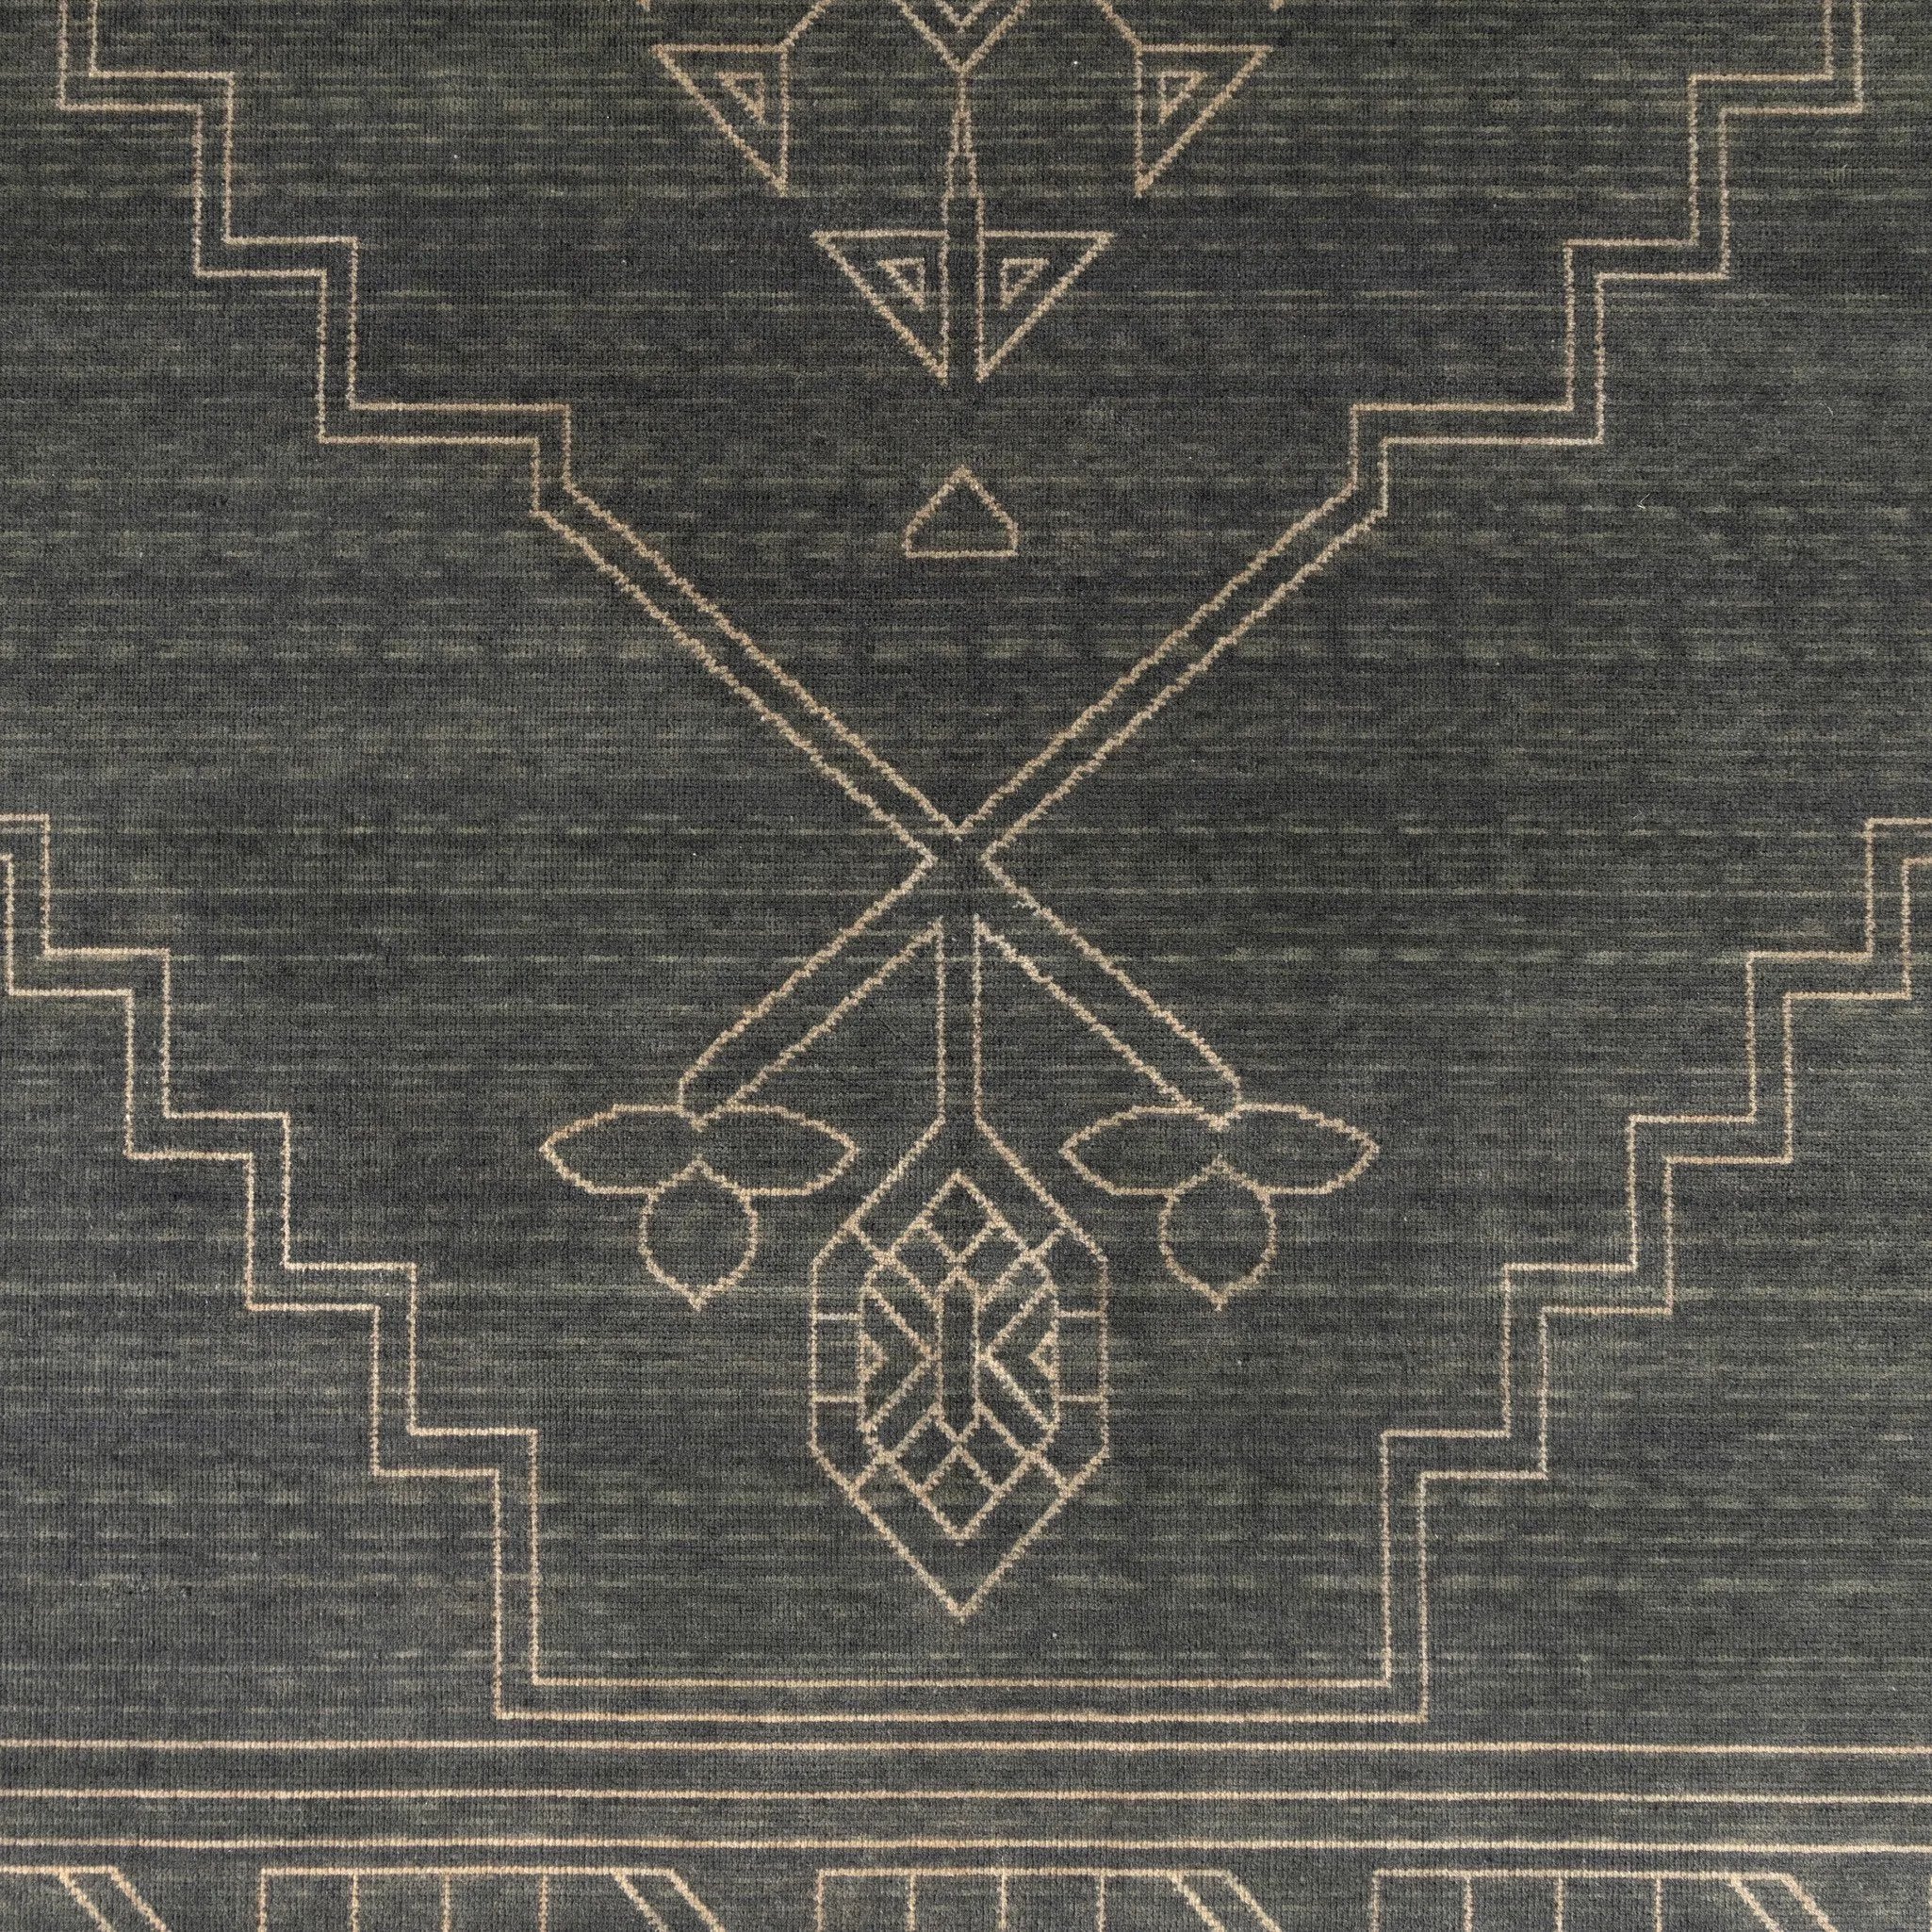 A subtle Turkish-inspired pattern adorns this wool-blend rug. The pattern and ground are purposefully similar in color for a unique take on a neutral.Overall Dimensions108.00"w x 144.00"d x 0.50"hFull Details &amp; SpecificationsTear SheetCleaning Code : X (vacuum Or Light Brush, No Cleaning Products Amethyst Home provides interior design, new home construction design consulting, vintage area rugs, and lighting in the Scottsdale metro area.